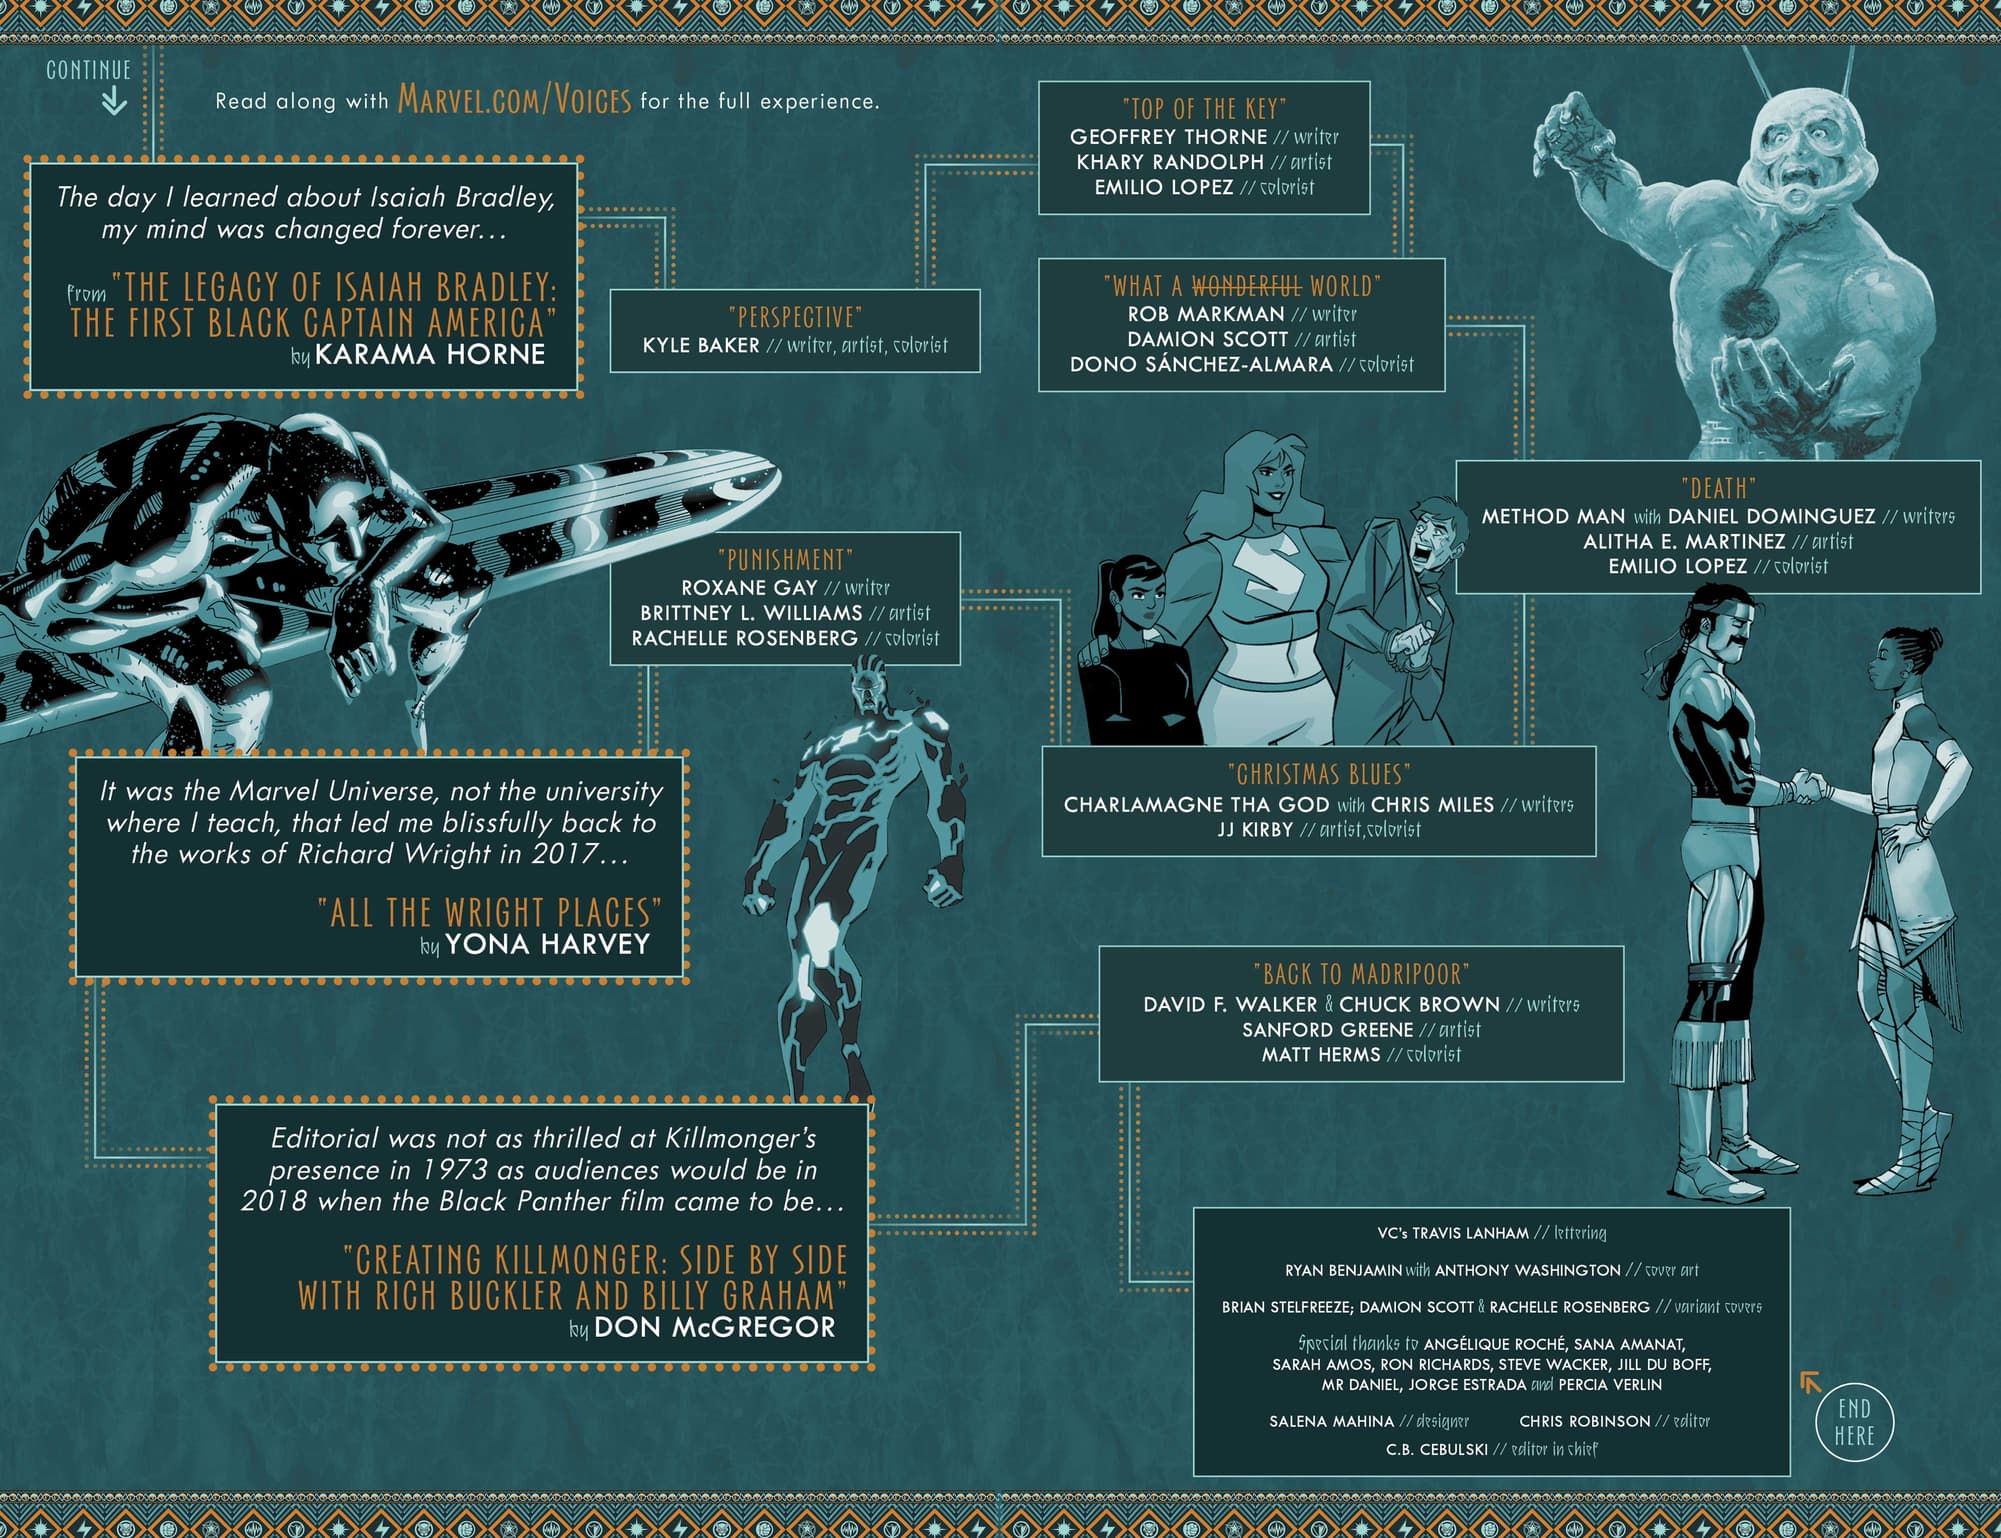 Marvel's Voices infographic 2